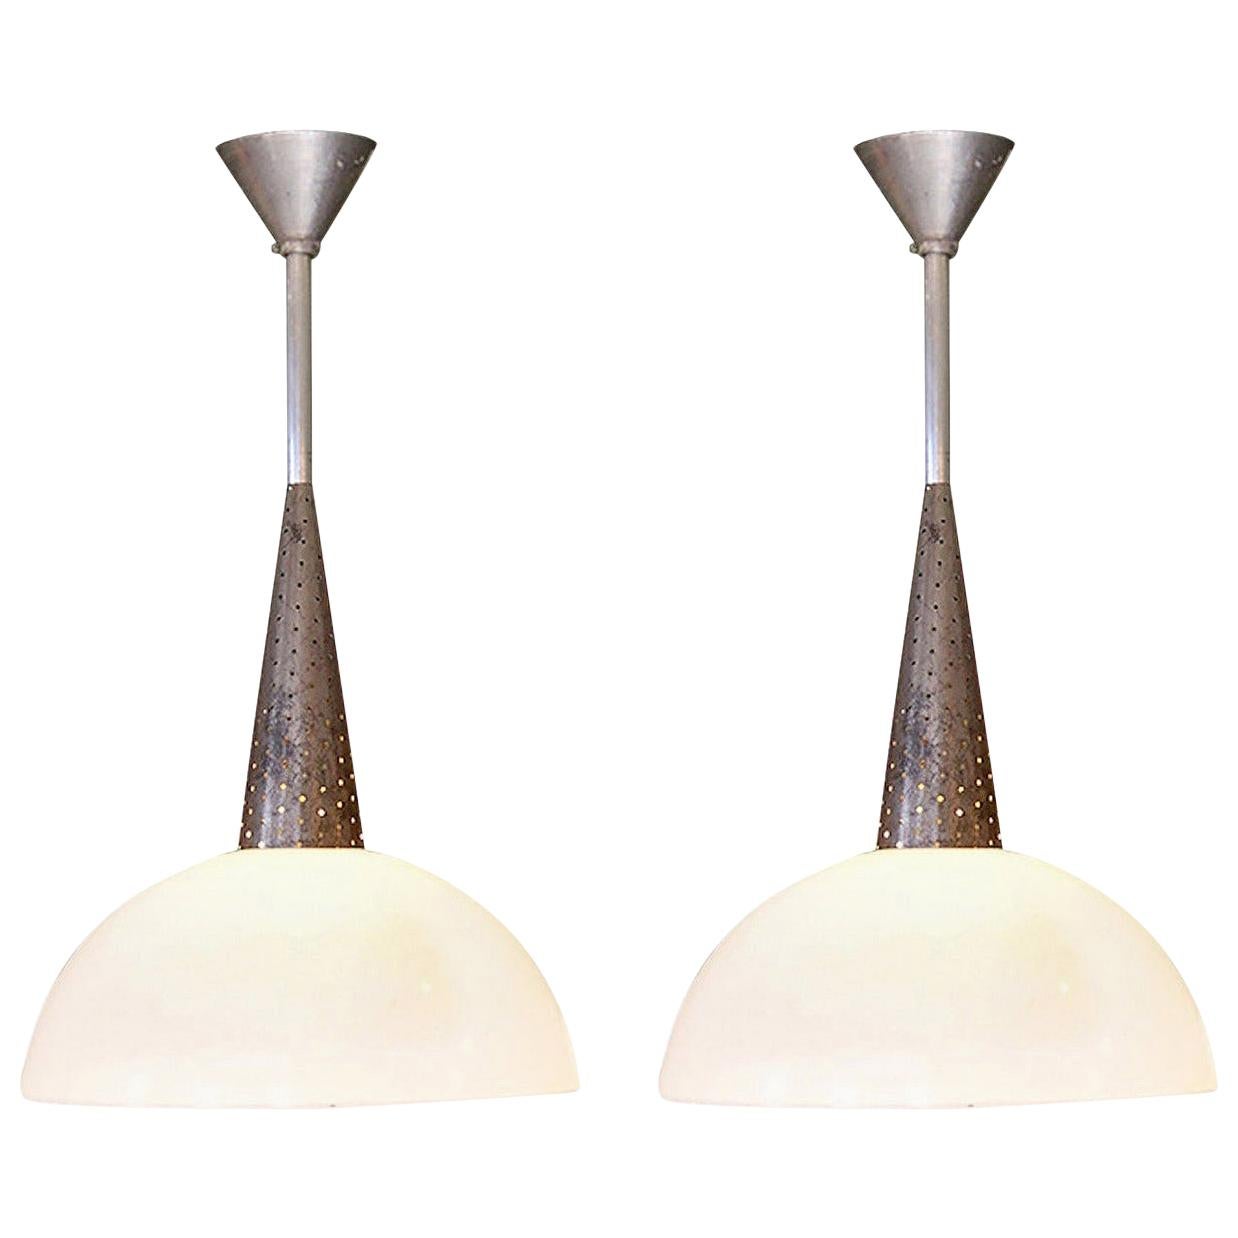 Pair of French 1960s Chrome Cone Shaped Pendants with Milk Glass Half Globes